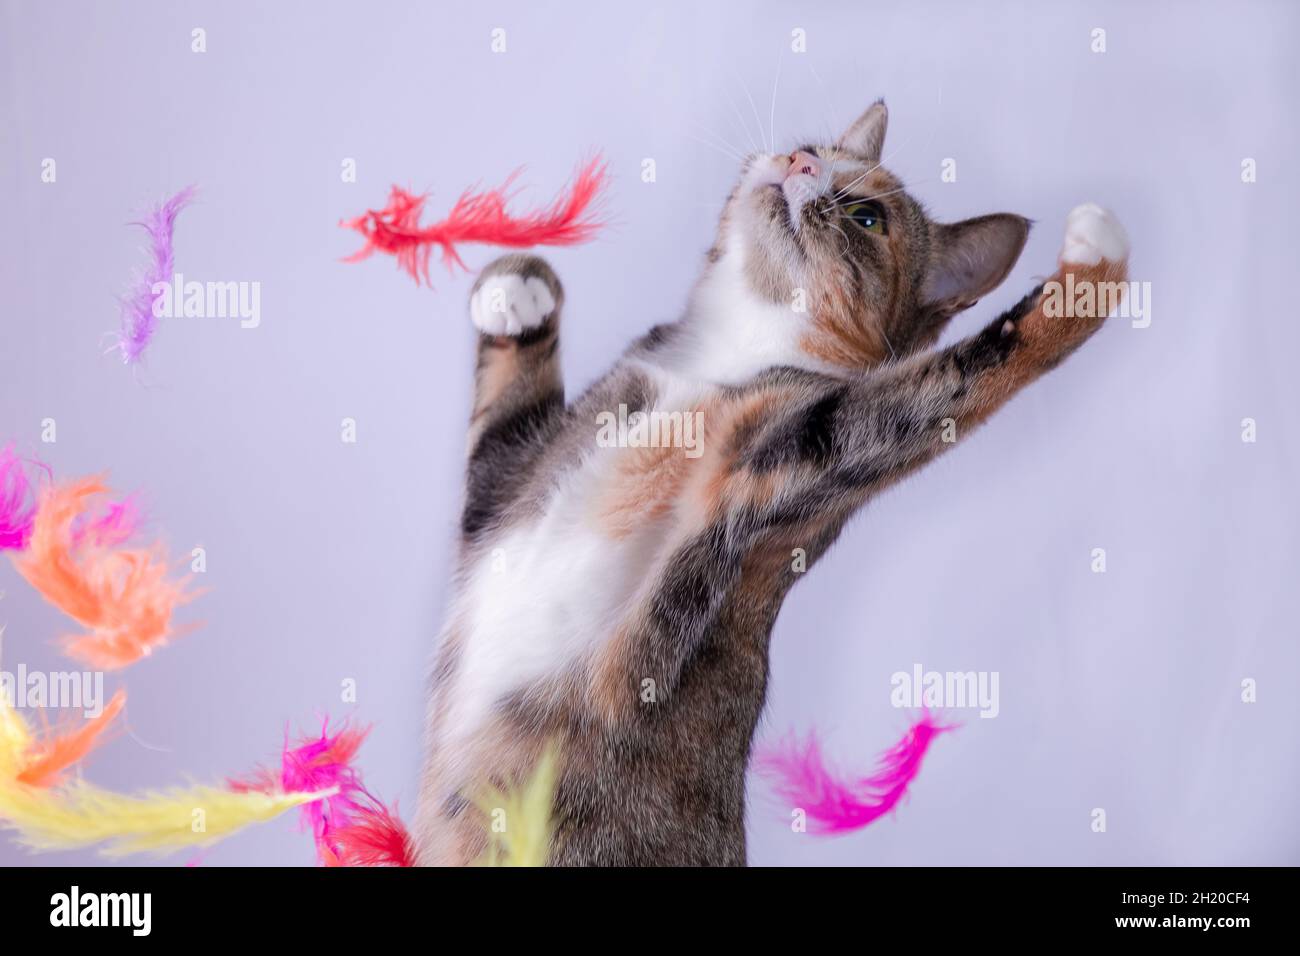 A tabby colored cat is posing as a dancer, surrounded by colorful feathers Stock Photo